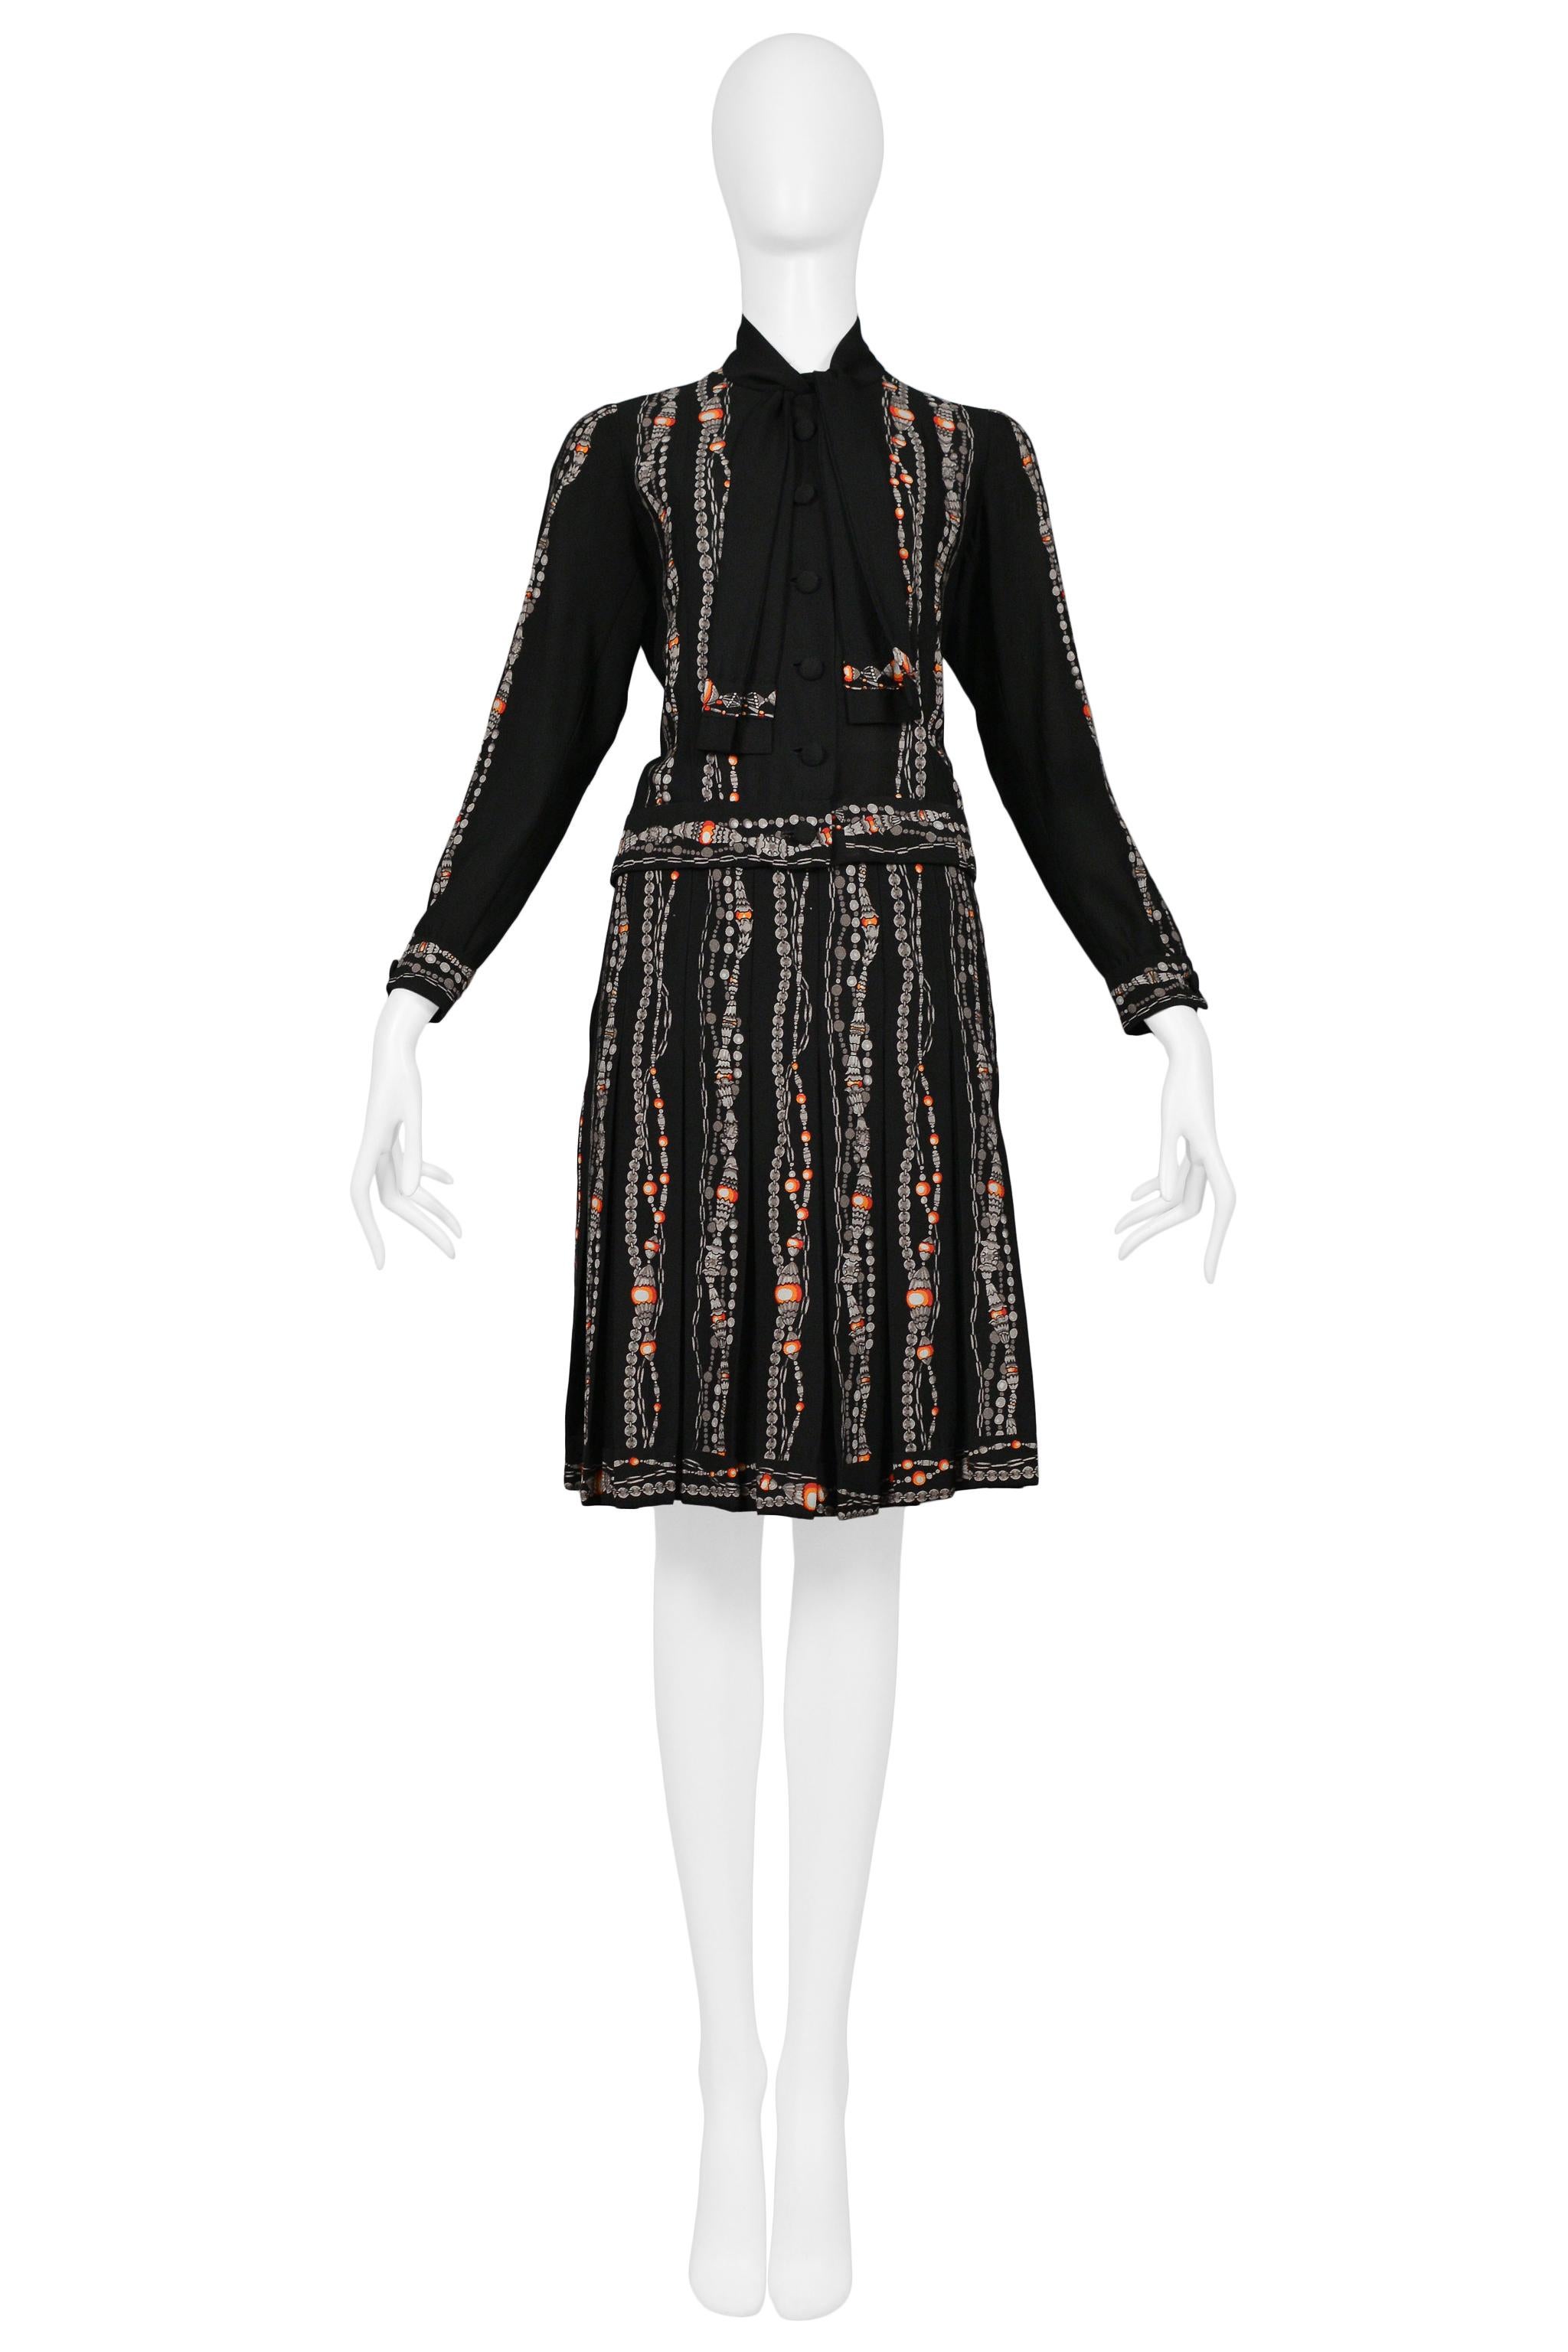 Resurrection Vintage is excited to offer a vintage Chanel by Karl Lagerfeld black skirt suit featuring a button front jacket, bow collar, covered buttons, iconic bead and pearl necklace print, interior gold chain weighting, and classic skirt. 